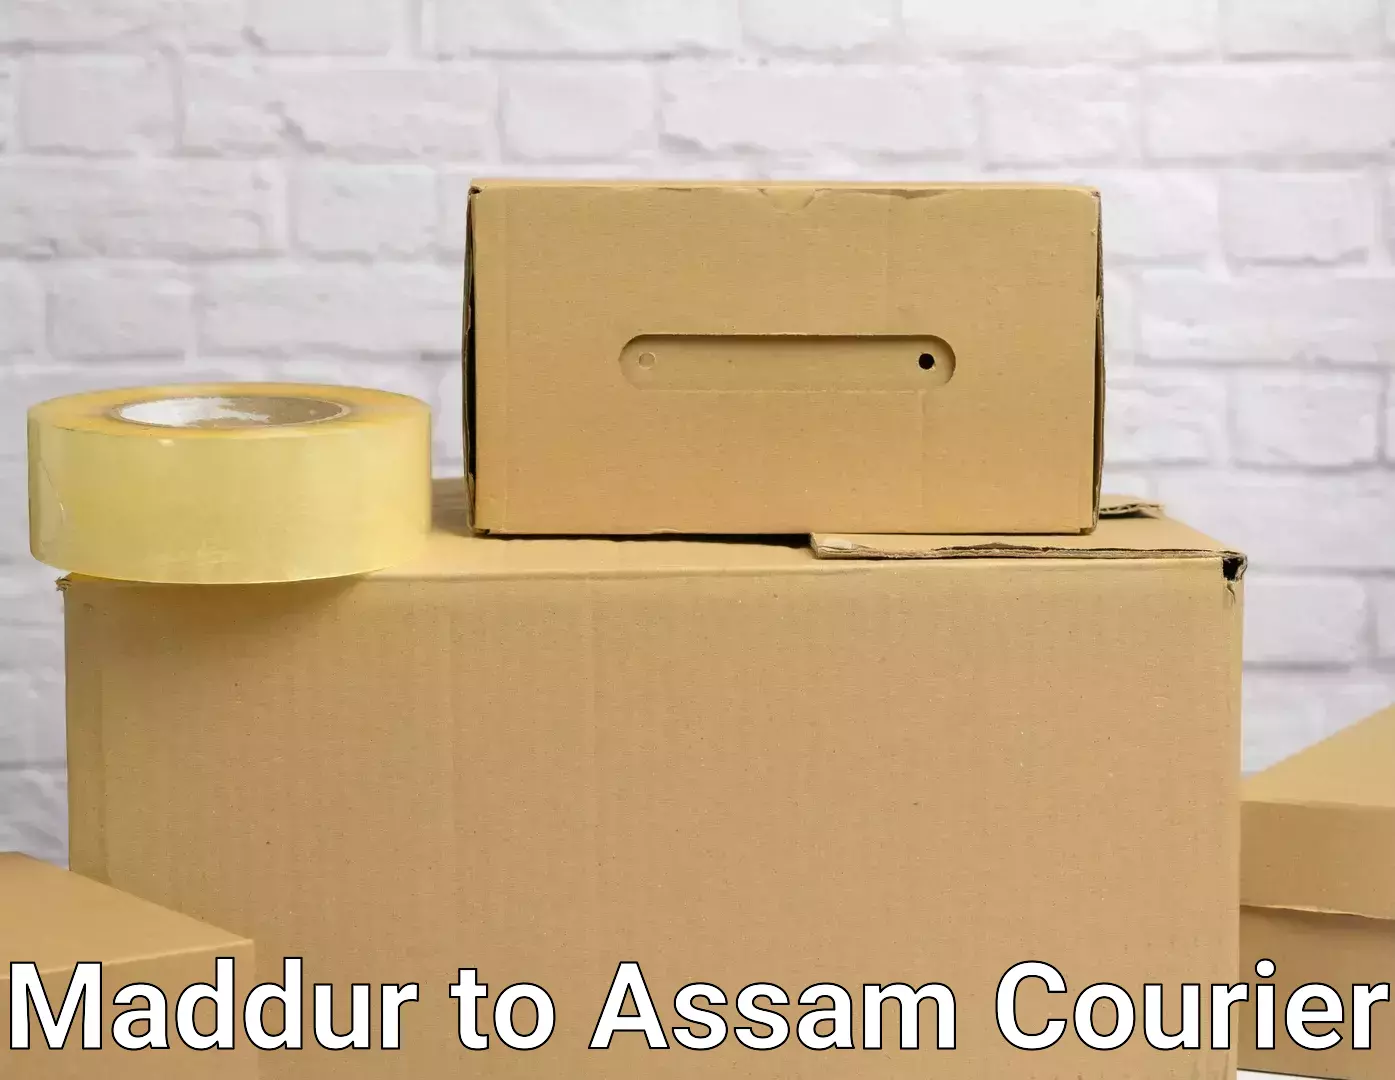 Furniture moving experts Maddur to Lala Assam